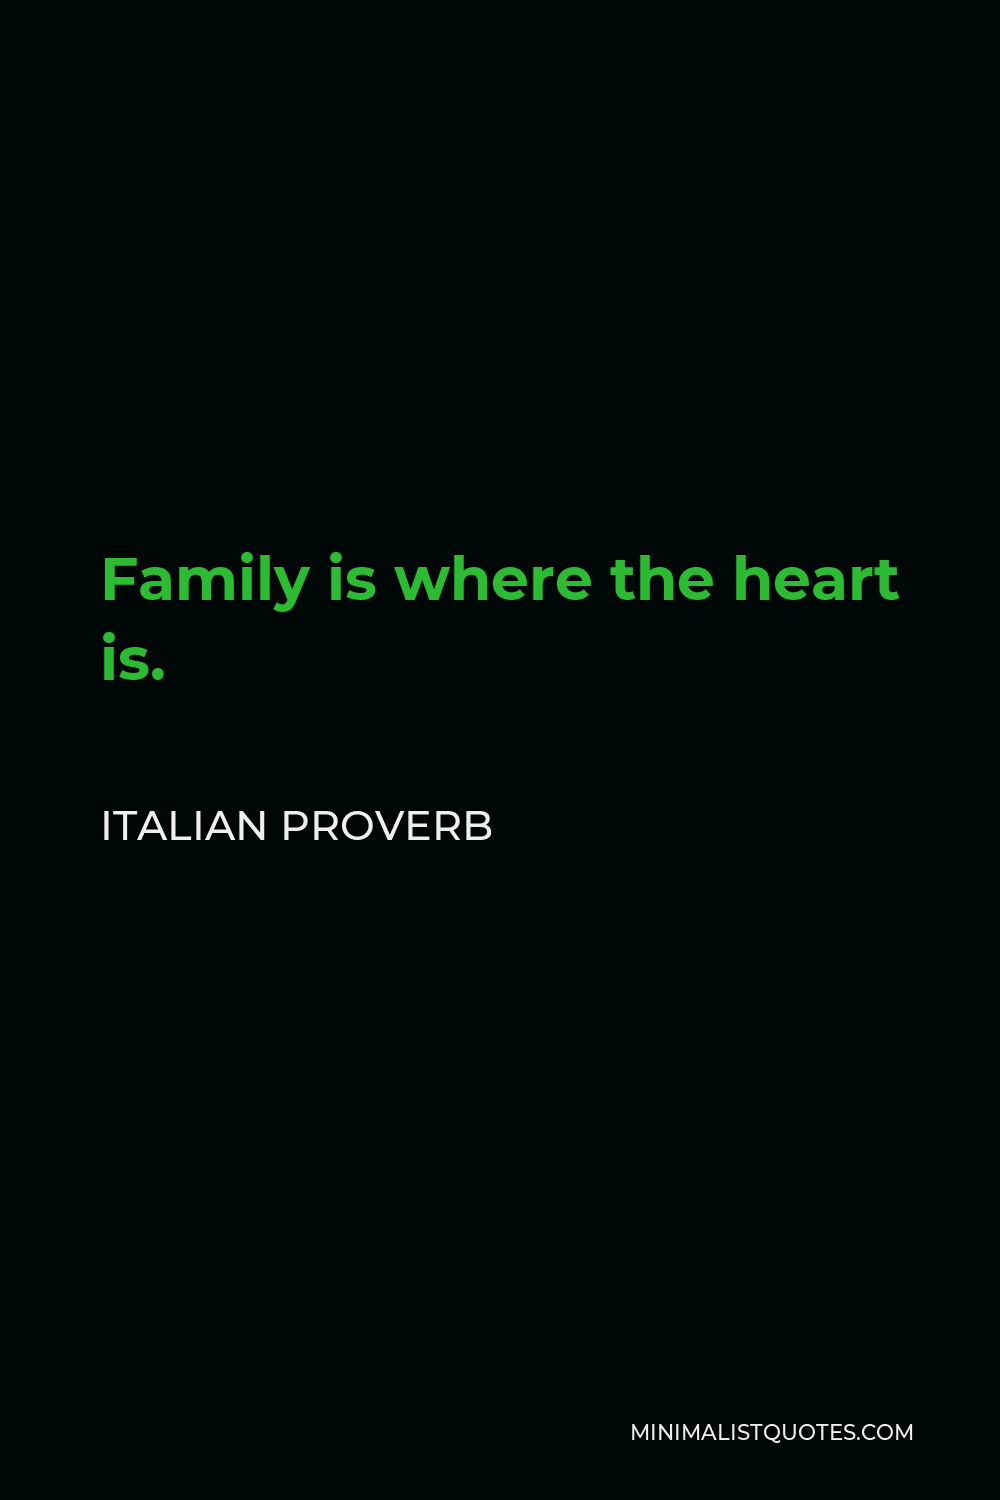 Italian Proverb Quote - Family is where the heart is.